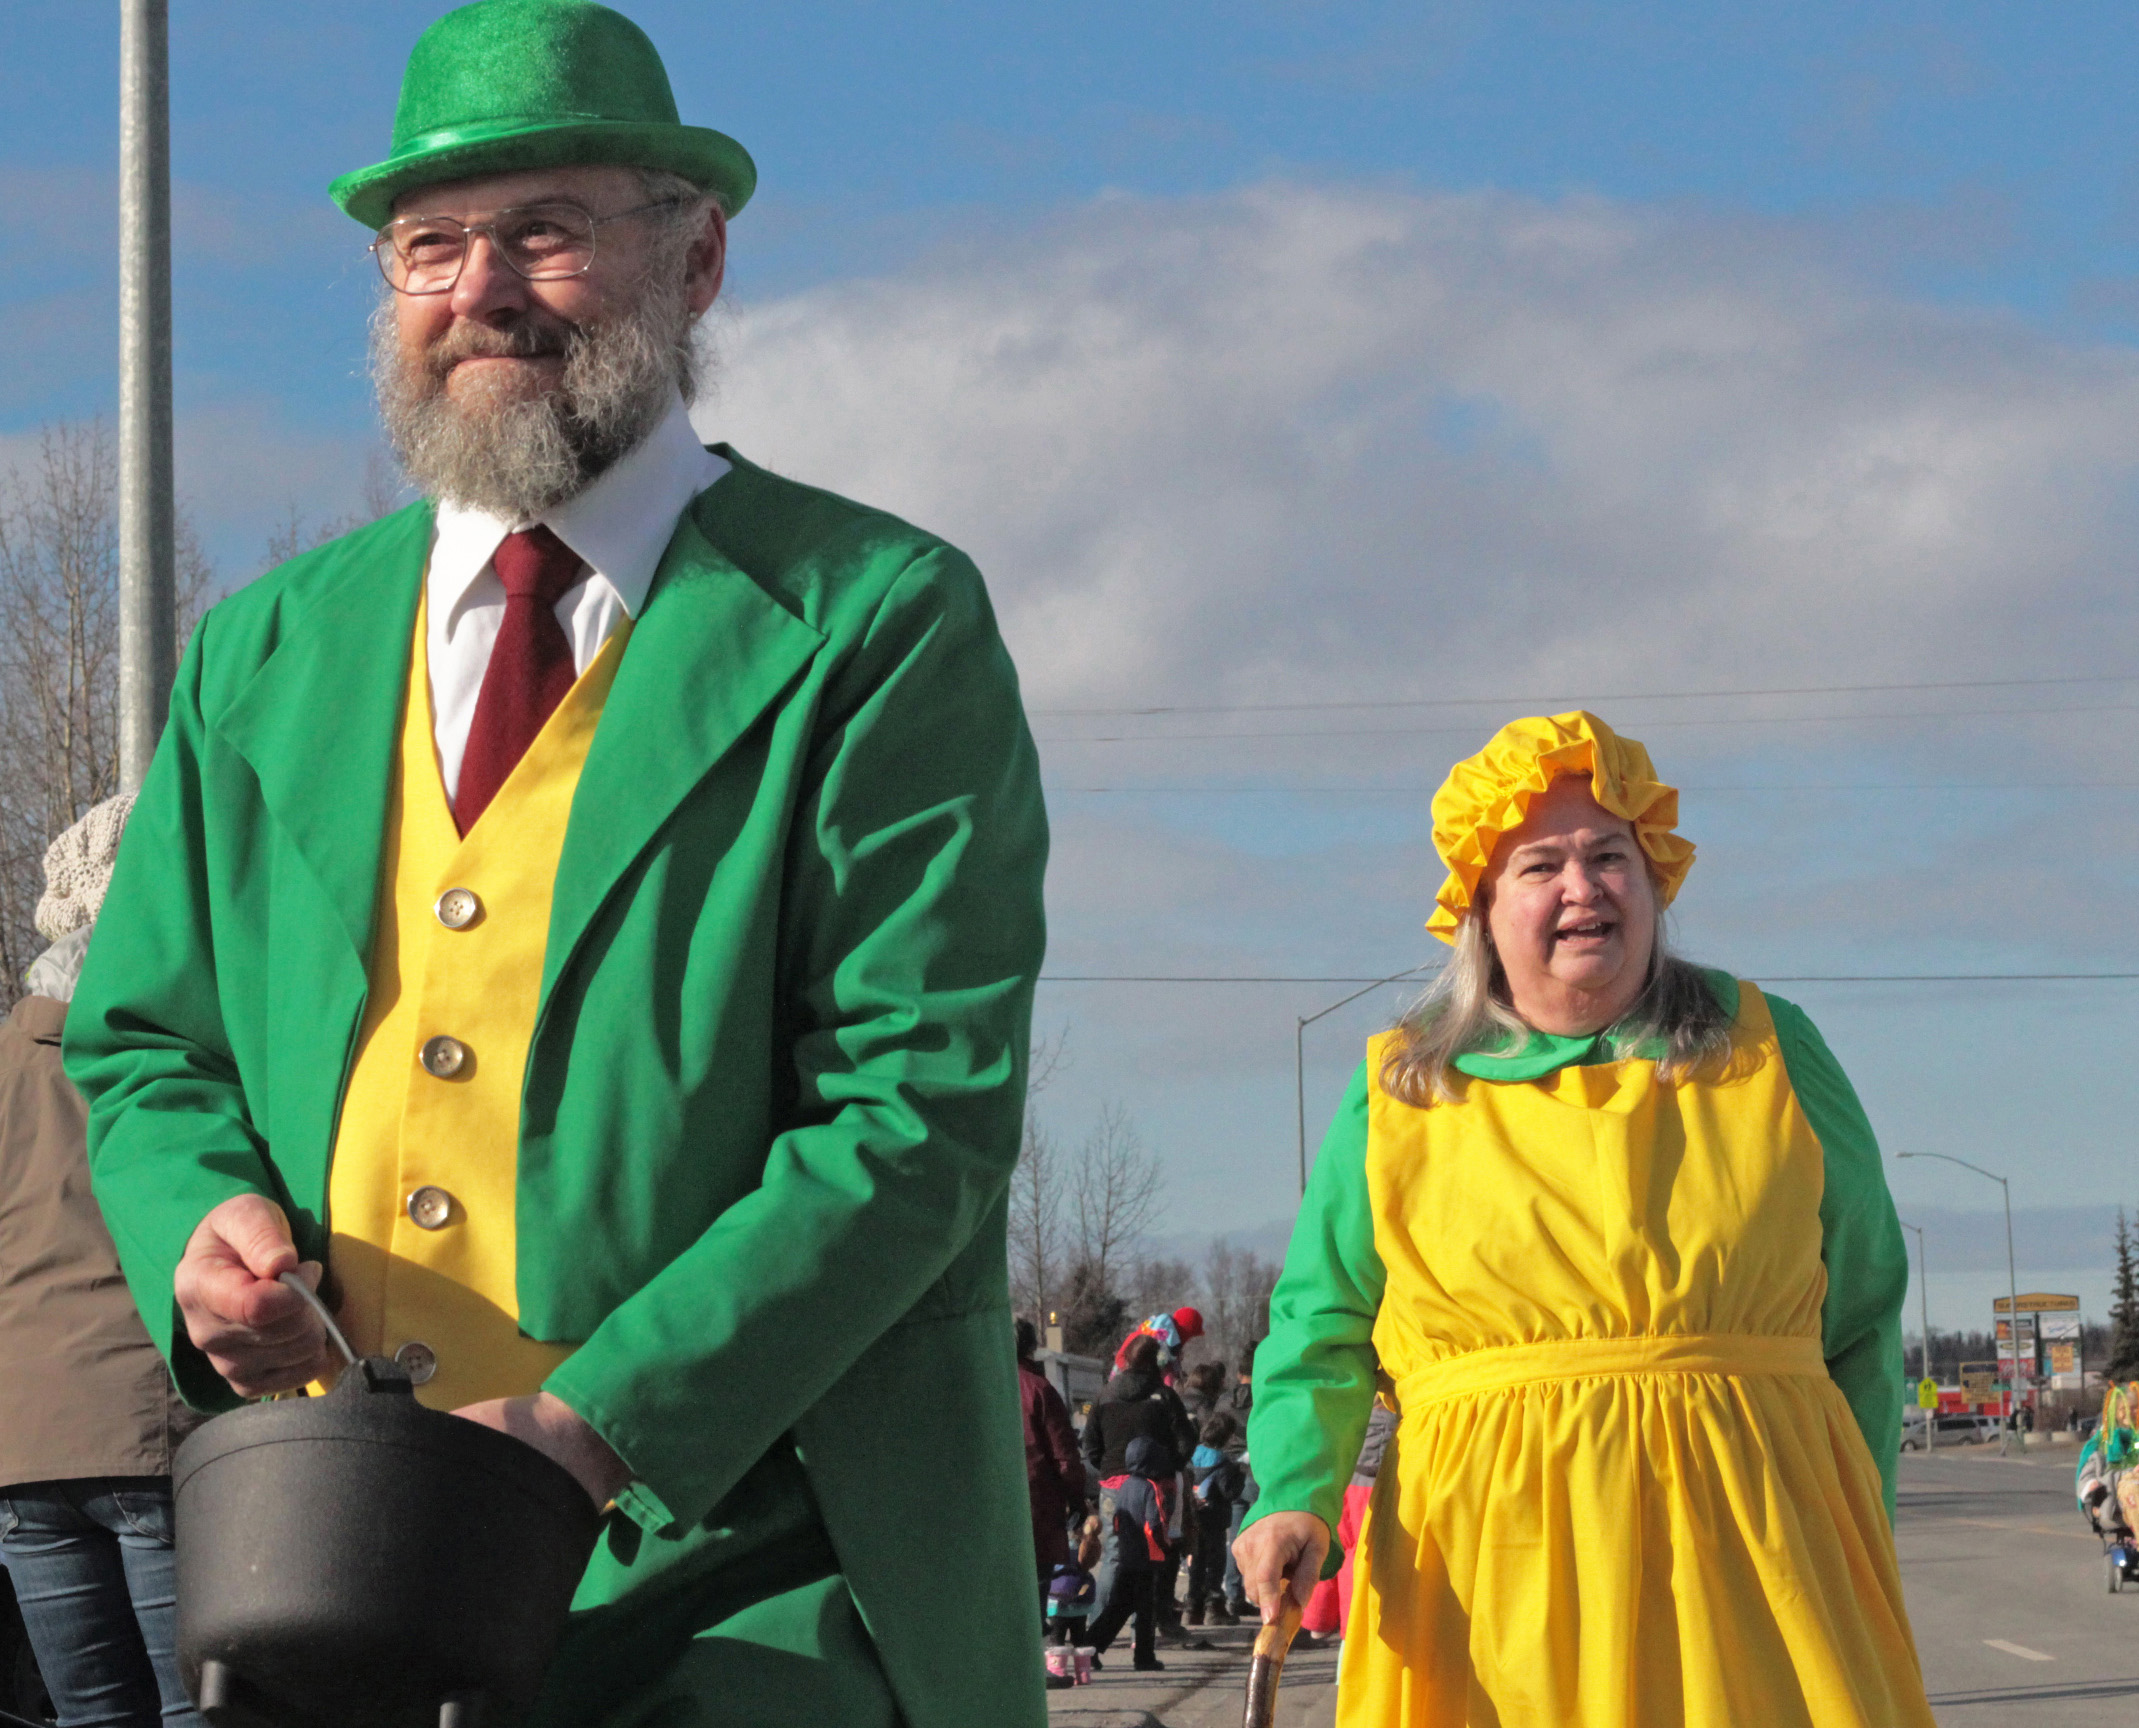 Tom (left) and Sonja Redmond distribute smiles and green pepermints during the Soldotna St. Patrick's Day parade on Thursday, March 17 in Soldotna. Sonja Redmond said the couple have marched in the parade almost every year since it began 25 years ago. Their grandchildren, Anna and Sara DeVolld, have joined them since Anna was "just old enough to sit up in a wagon," Sonja said. Asked why they had first joined the parade, Sonja said "I don't remember — seems like we always have."